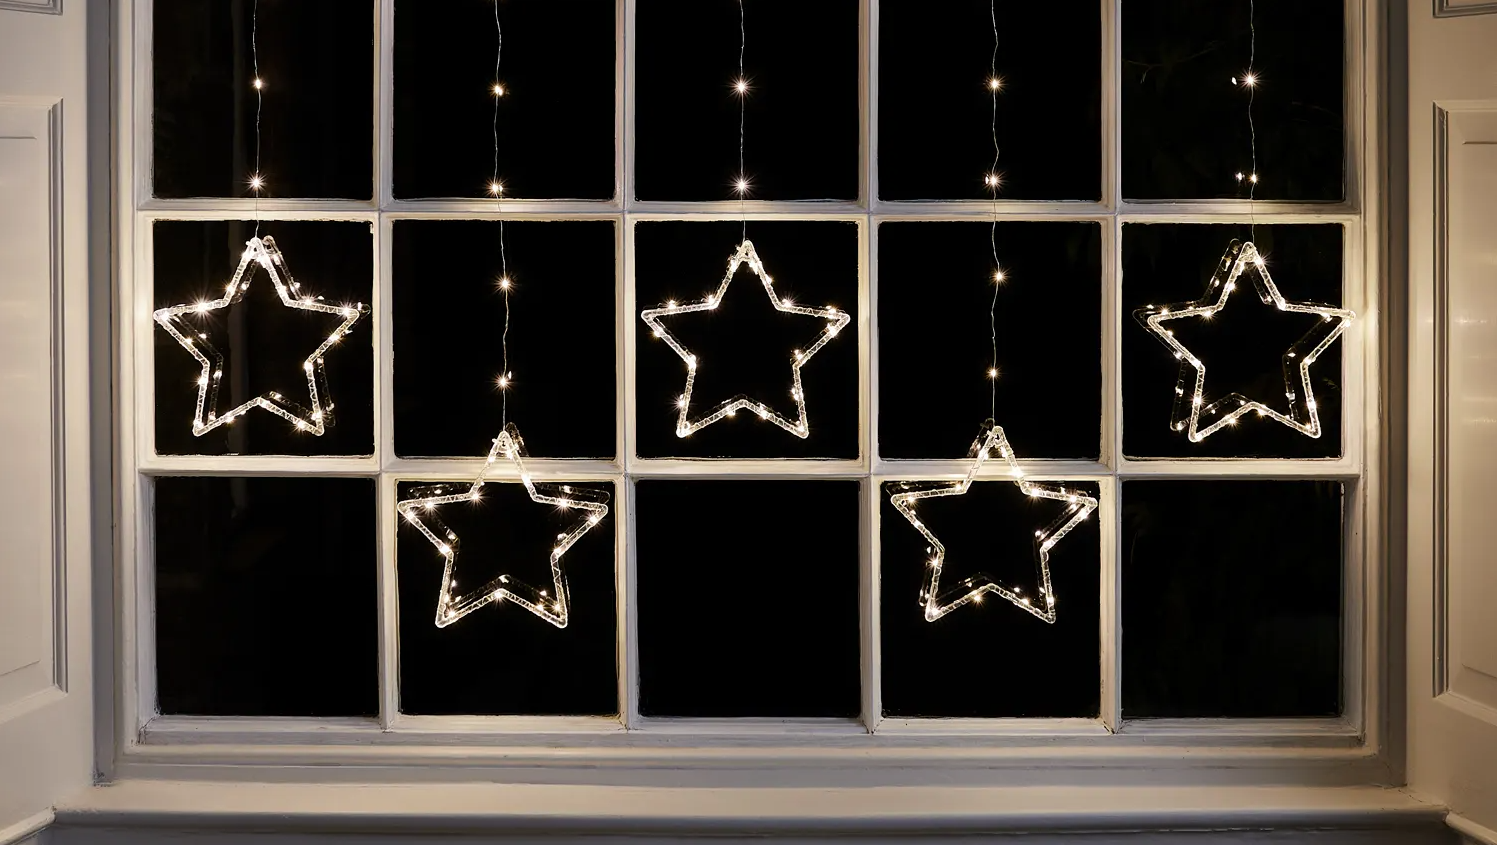 Star curtain lights in a window.